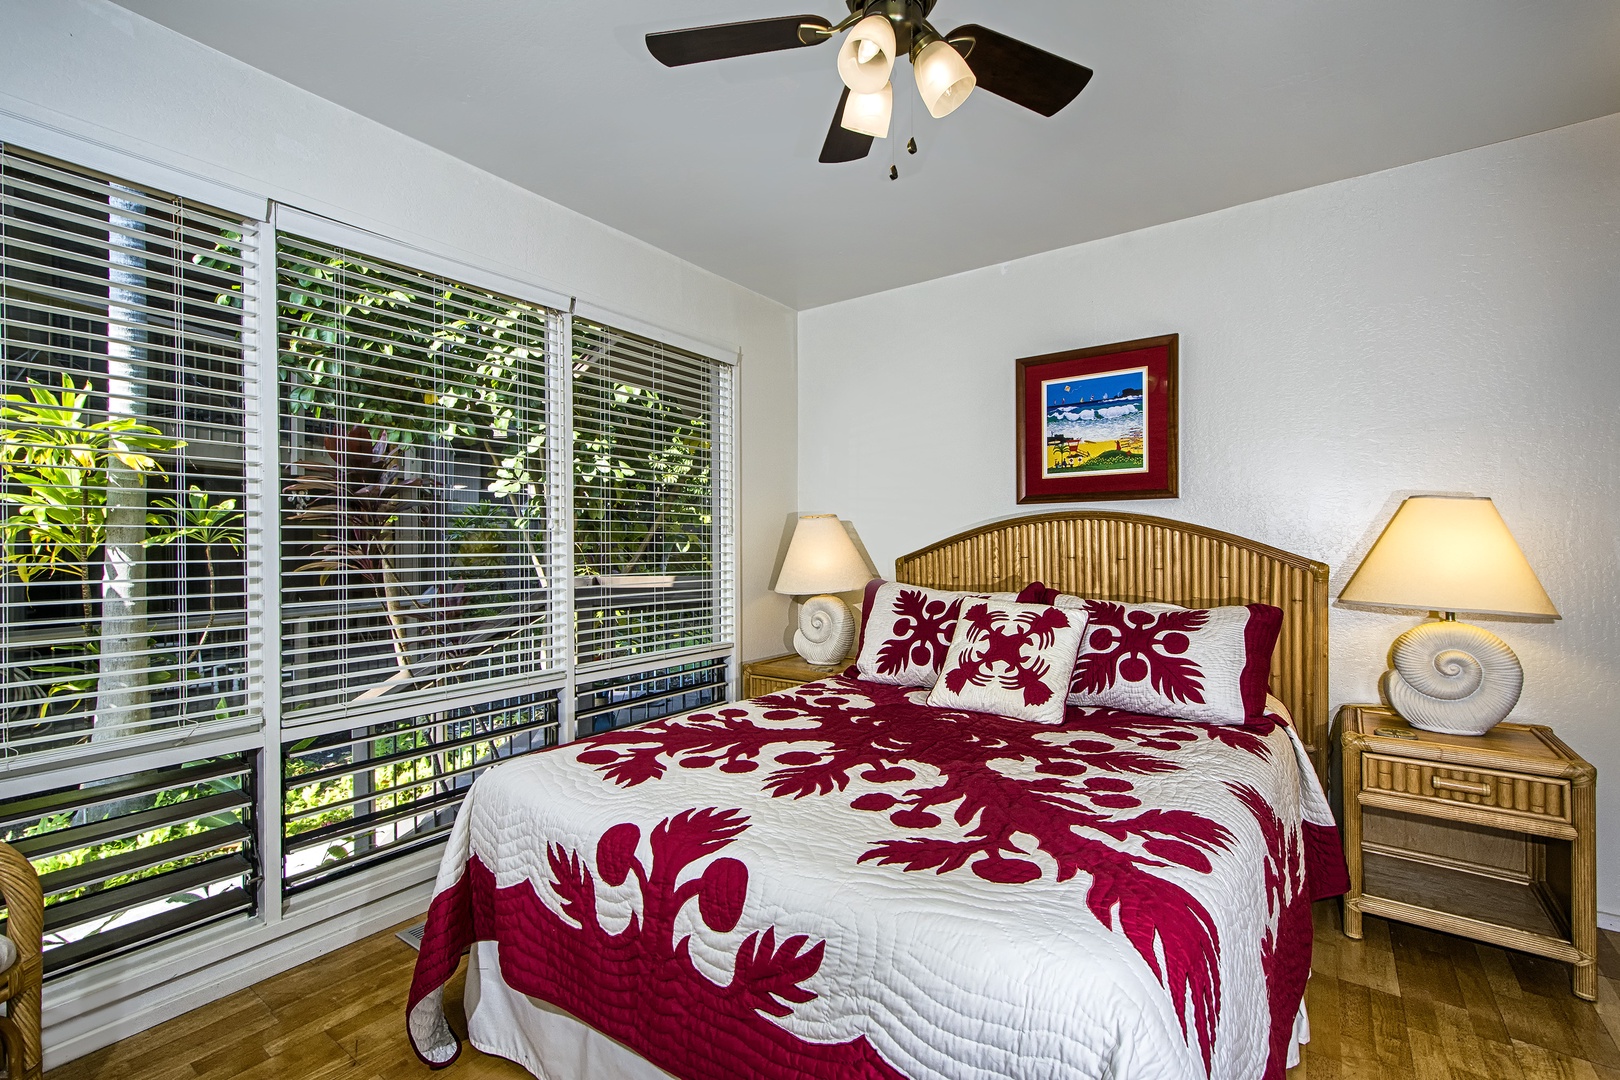 Kailua Kona Vacation Rentals, Kanaloa 701 - Guest bedroom equipped with Queen bed featuring central A/C